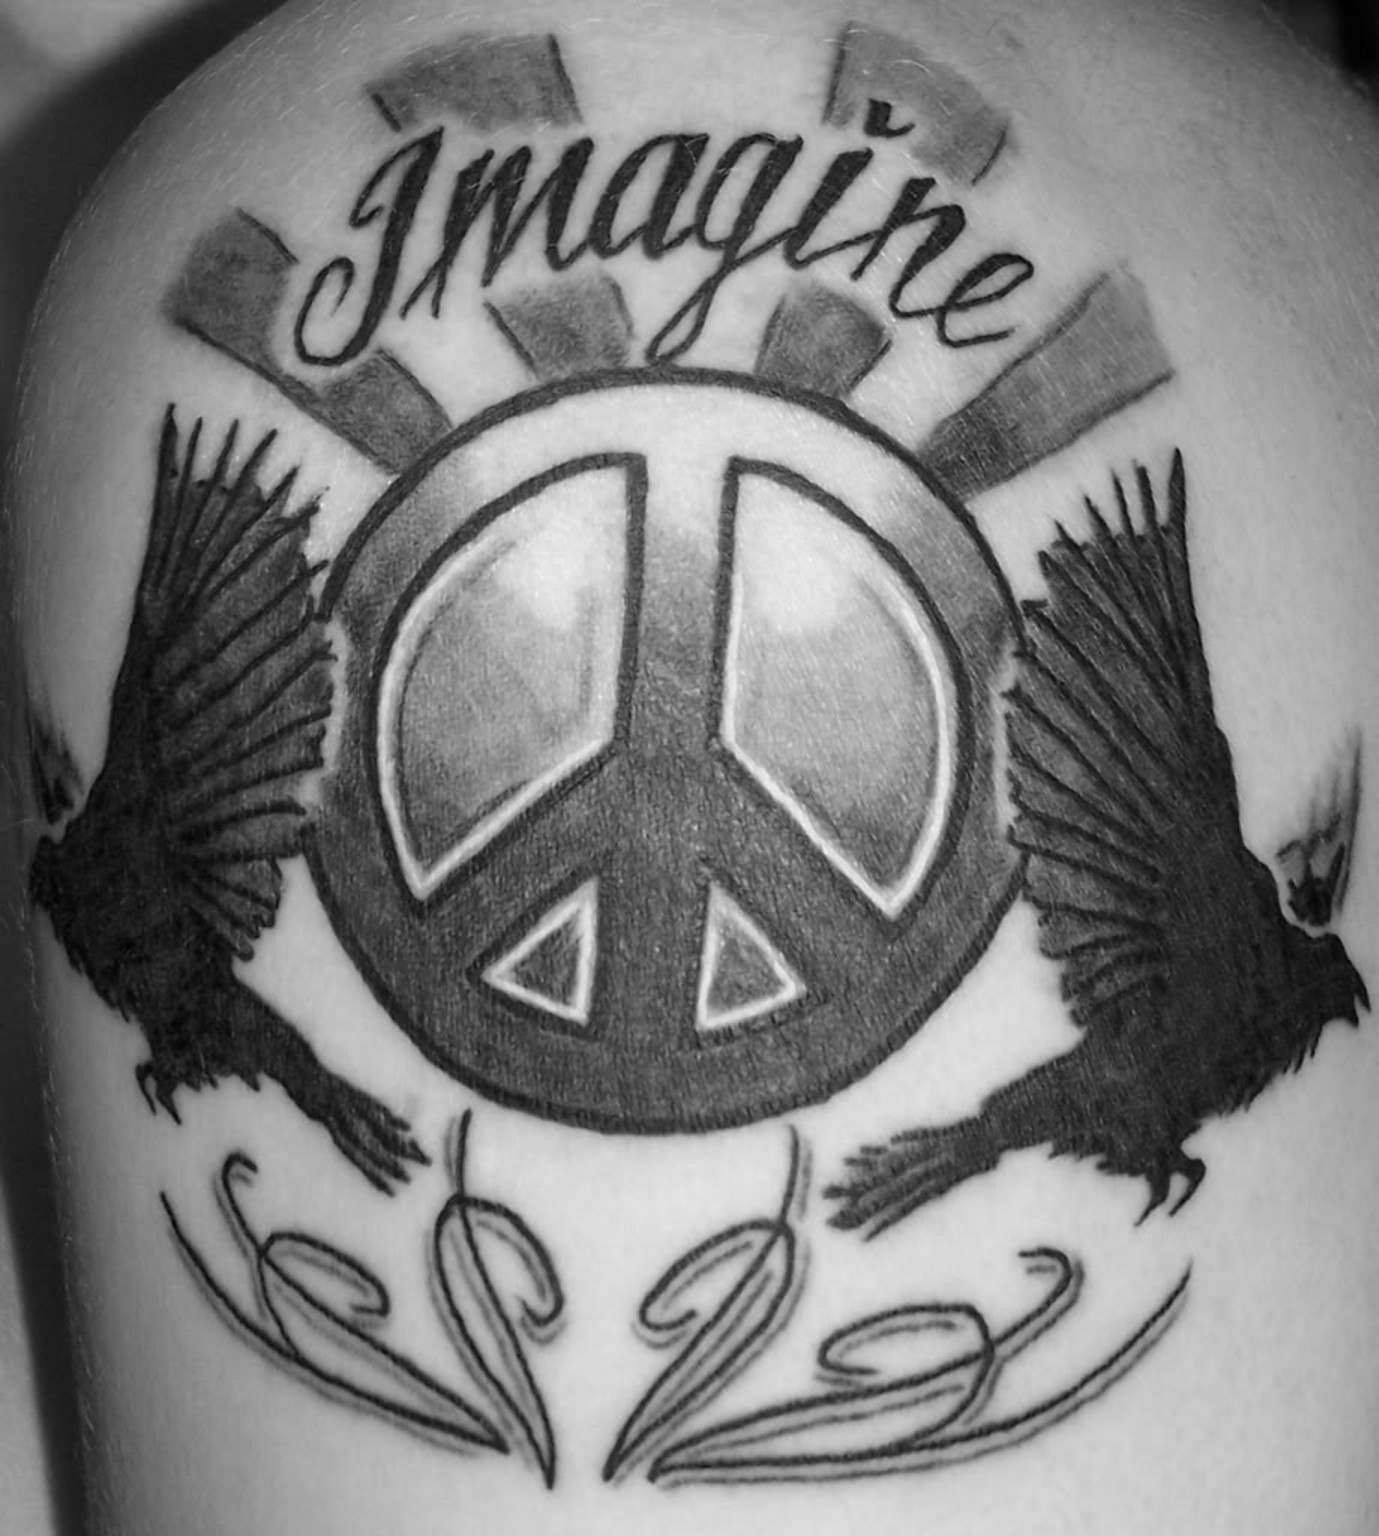 Imagine - Black Ink Peace Logo With Two Flying Bird Tattoo Design For Shoulder